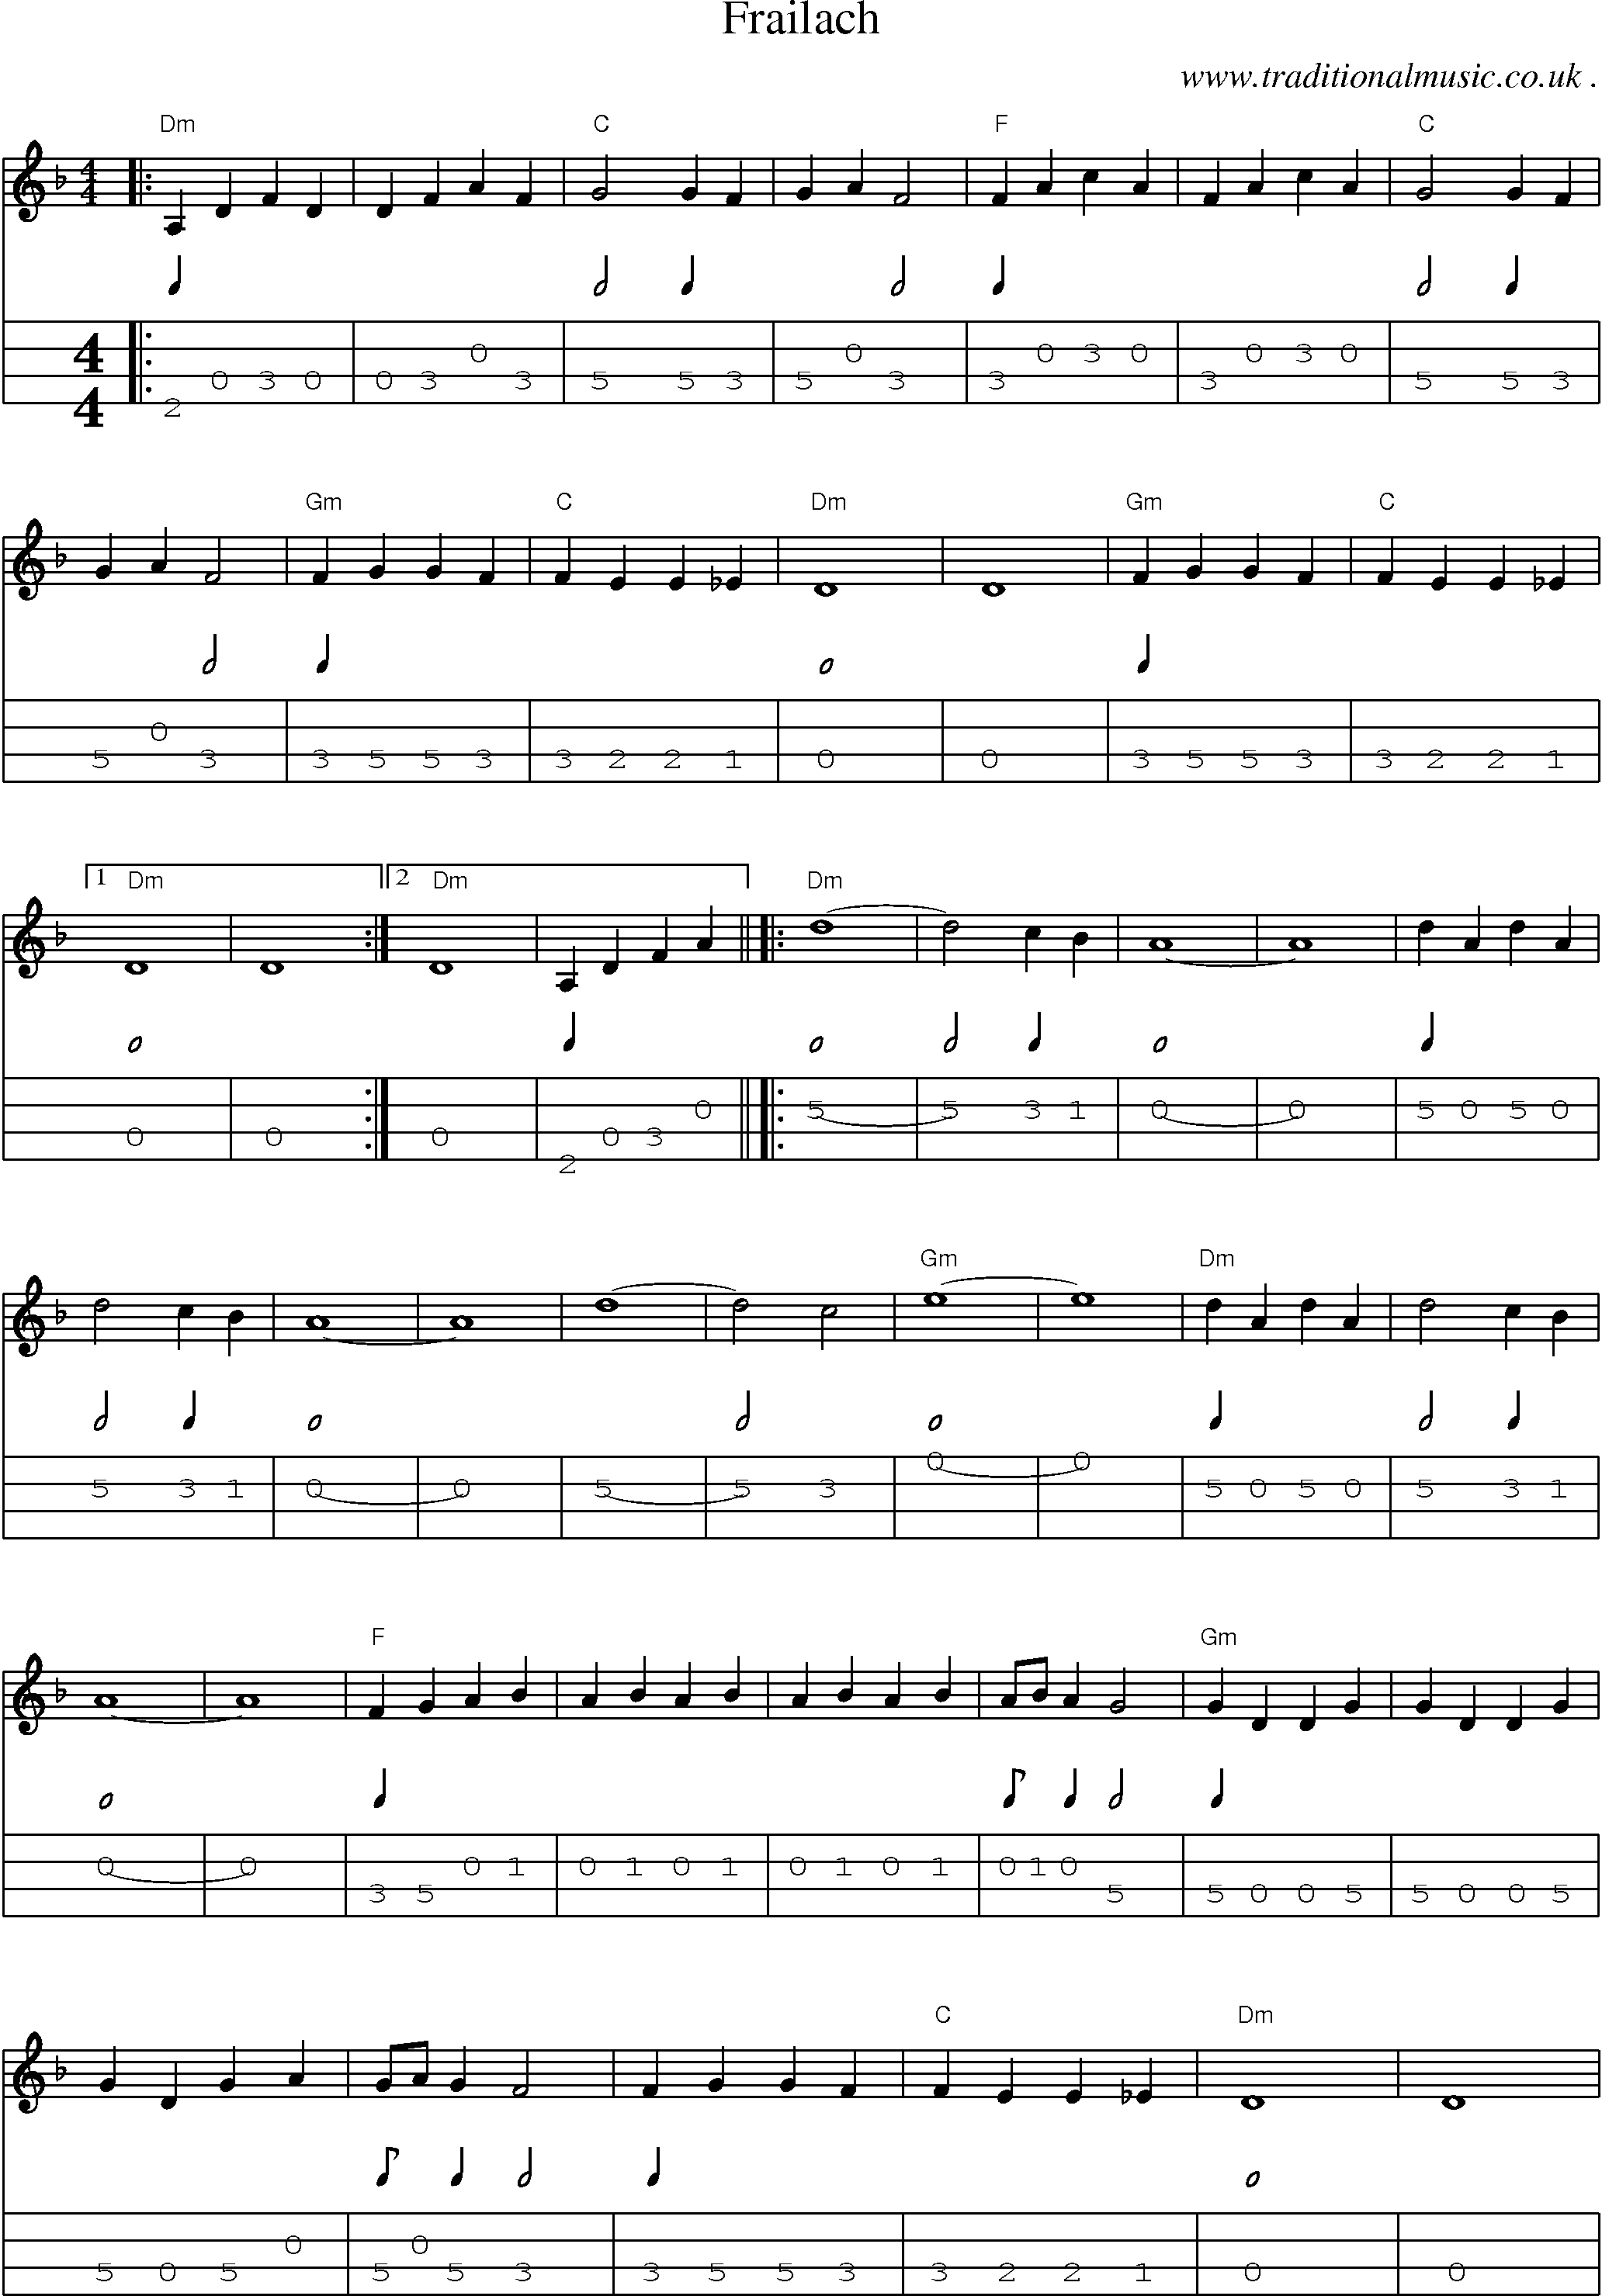 Music Score and Guitar Tabs for Frailach